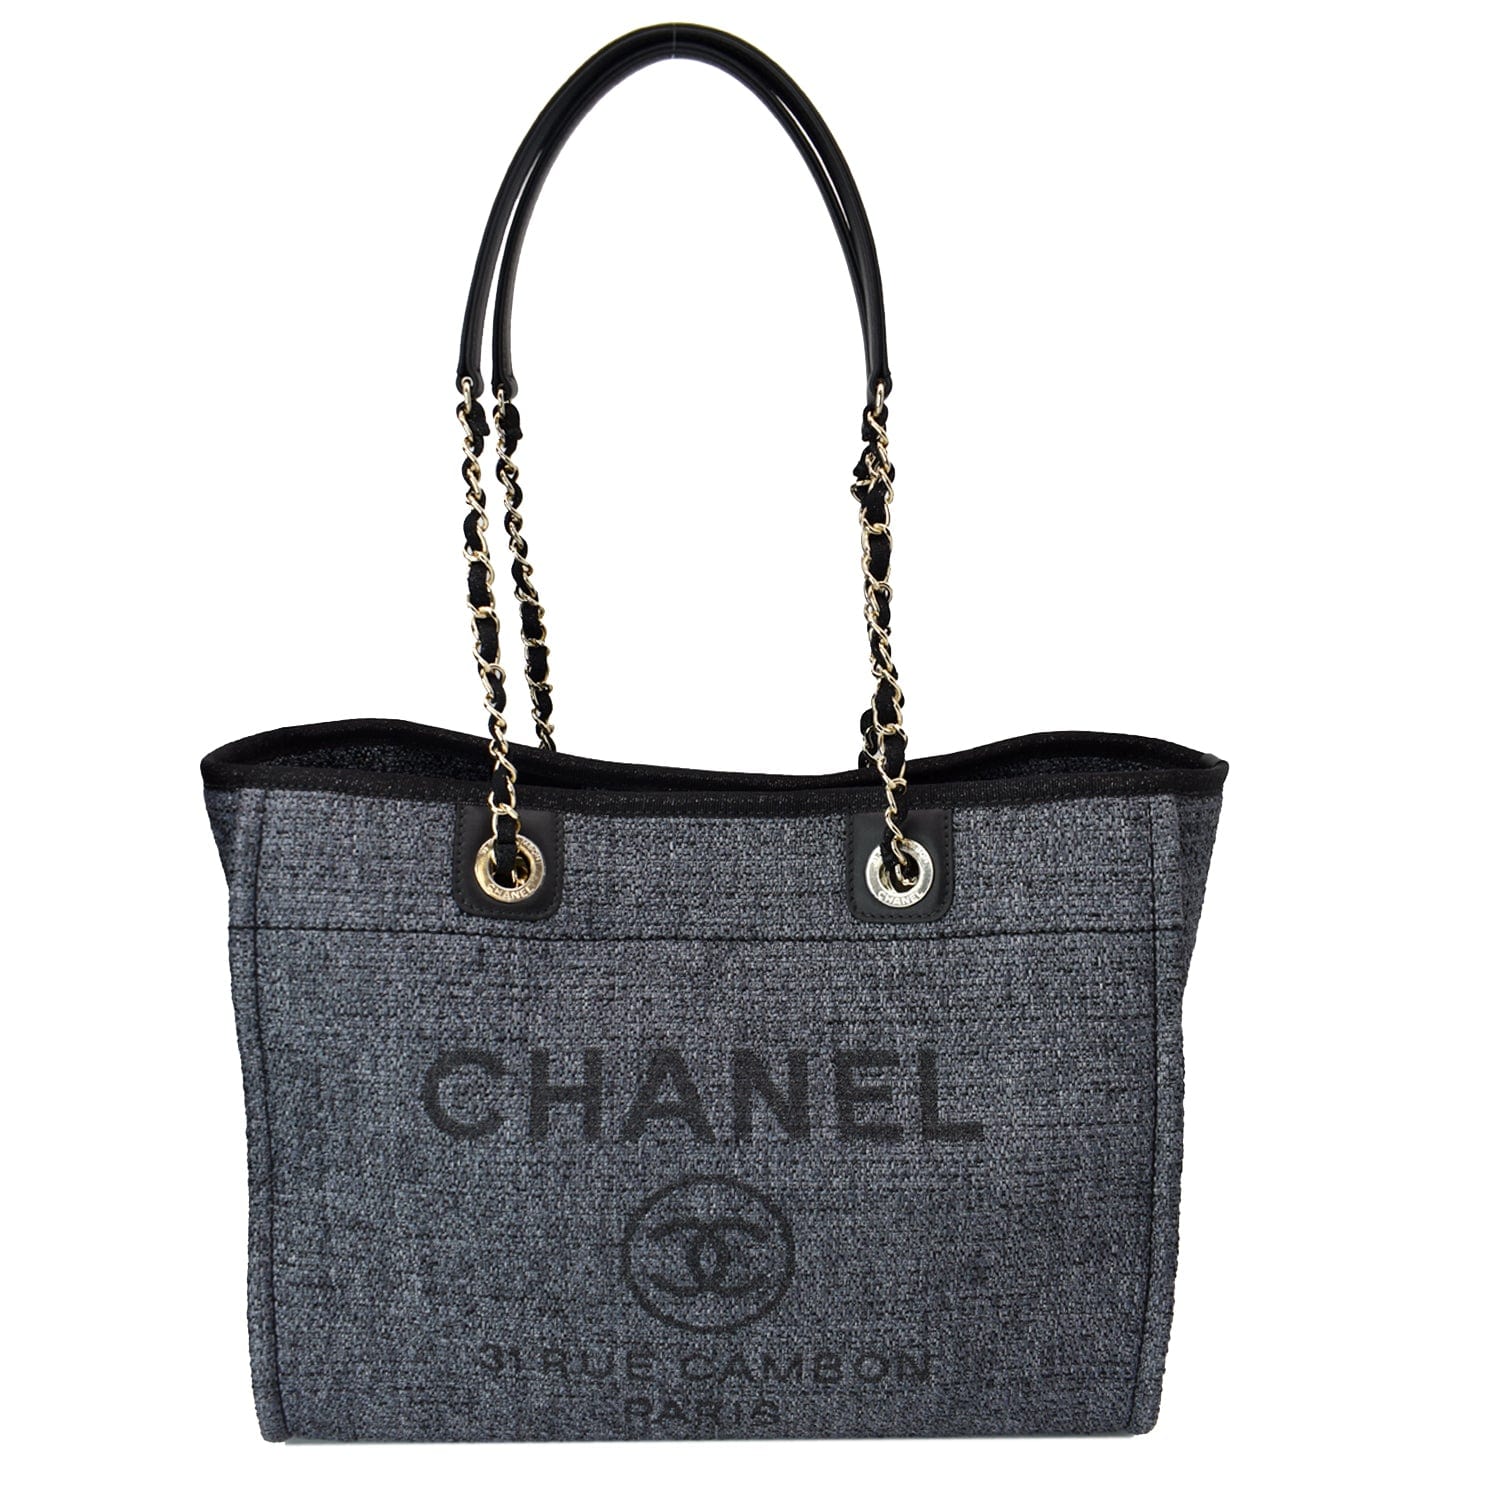 Chanel Small Deauville Tote Bag - Kaialux